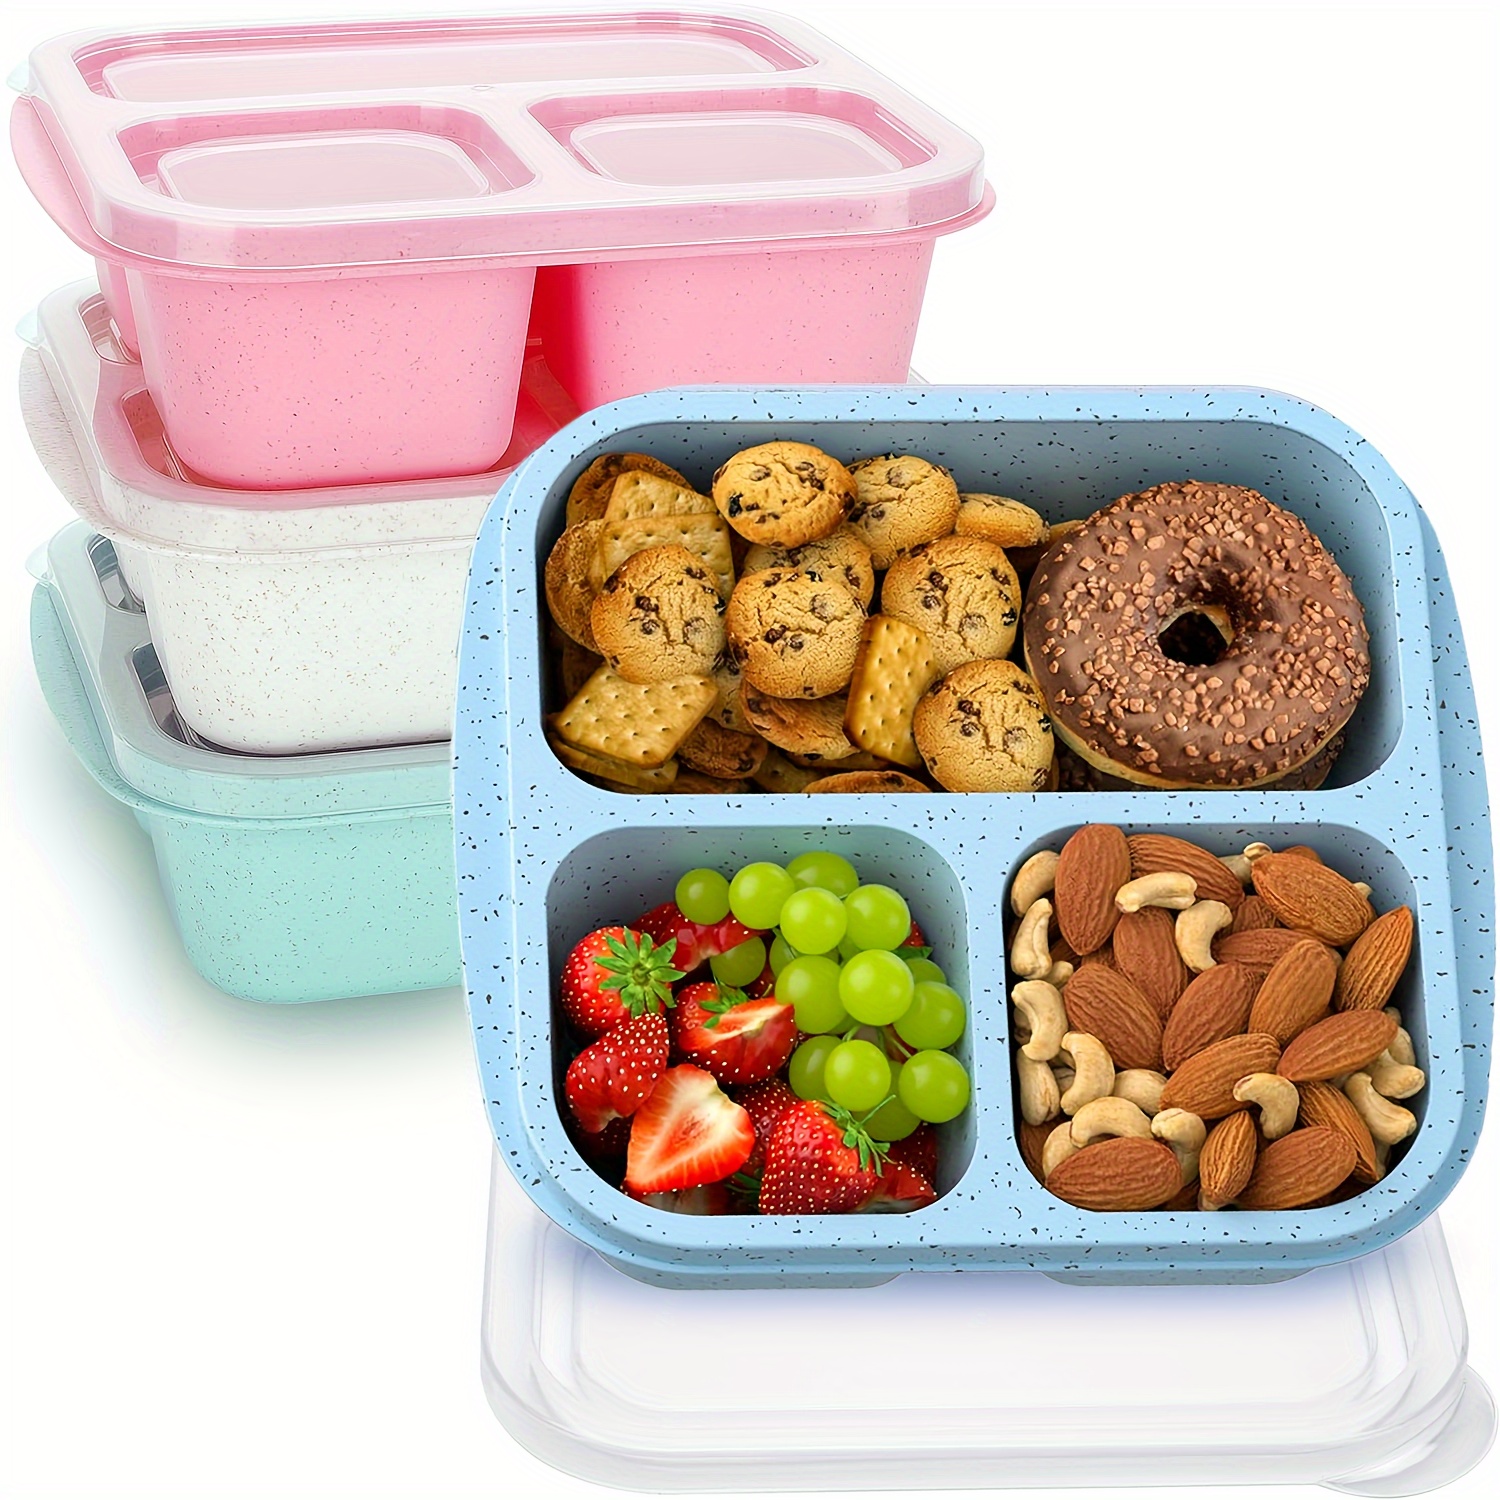 

1pc 3-compartment Meal Prep Lunch Box, Reusable Snack Container With Lid, Stackable Food Storage Box, Dishwasher Safe Plastic Rectangle Bento Box For Work And Travel, Manual, No Electricity Needed